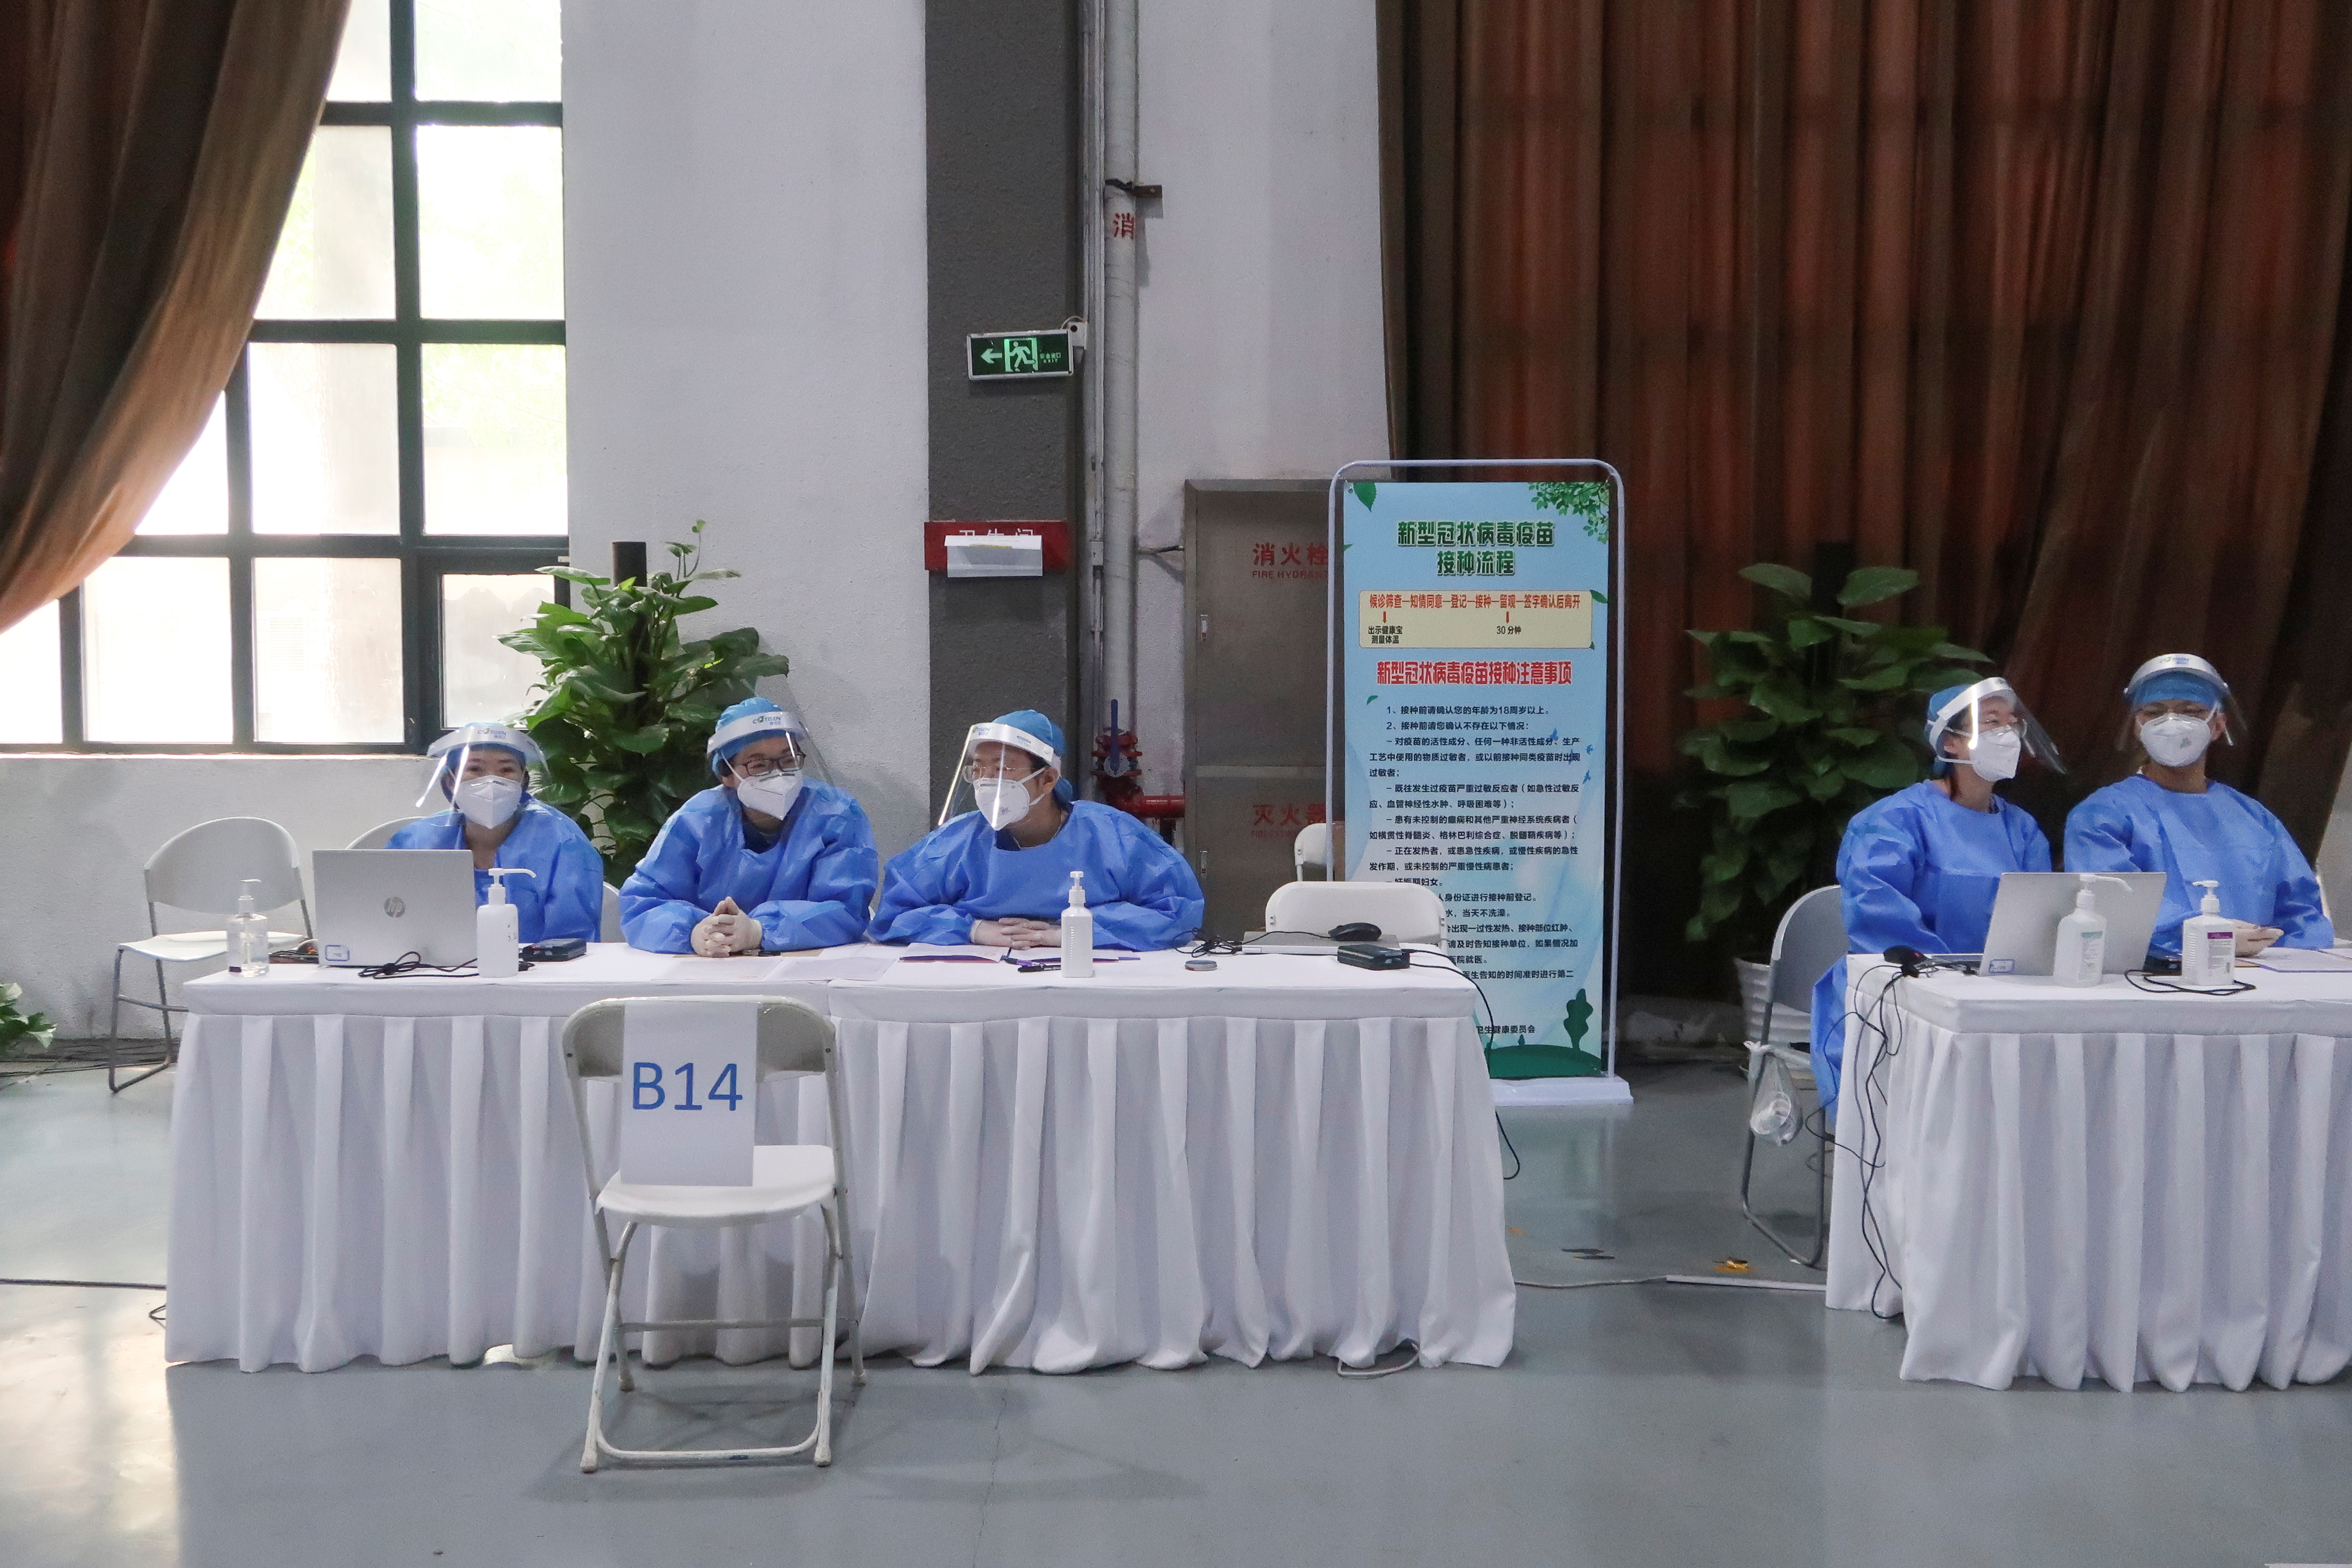 Staff members sit at desks to register people for a shot of a vaccine against the coronavirus disease (COVID-19) at a vaccination center, during a government-organized visit, in Beijing, China, April 15, 2021.  REUTERS/Thomas Peter